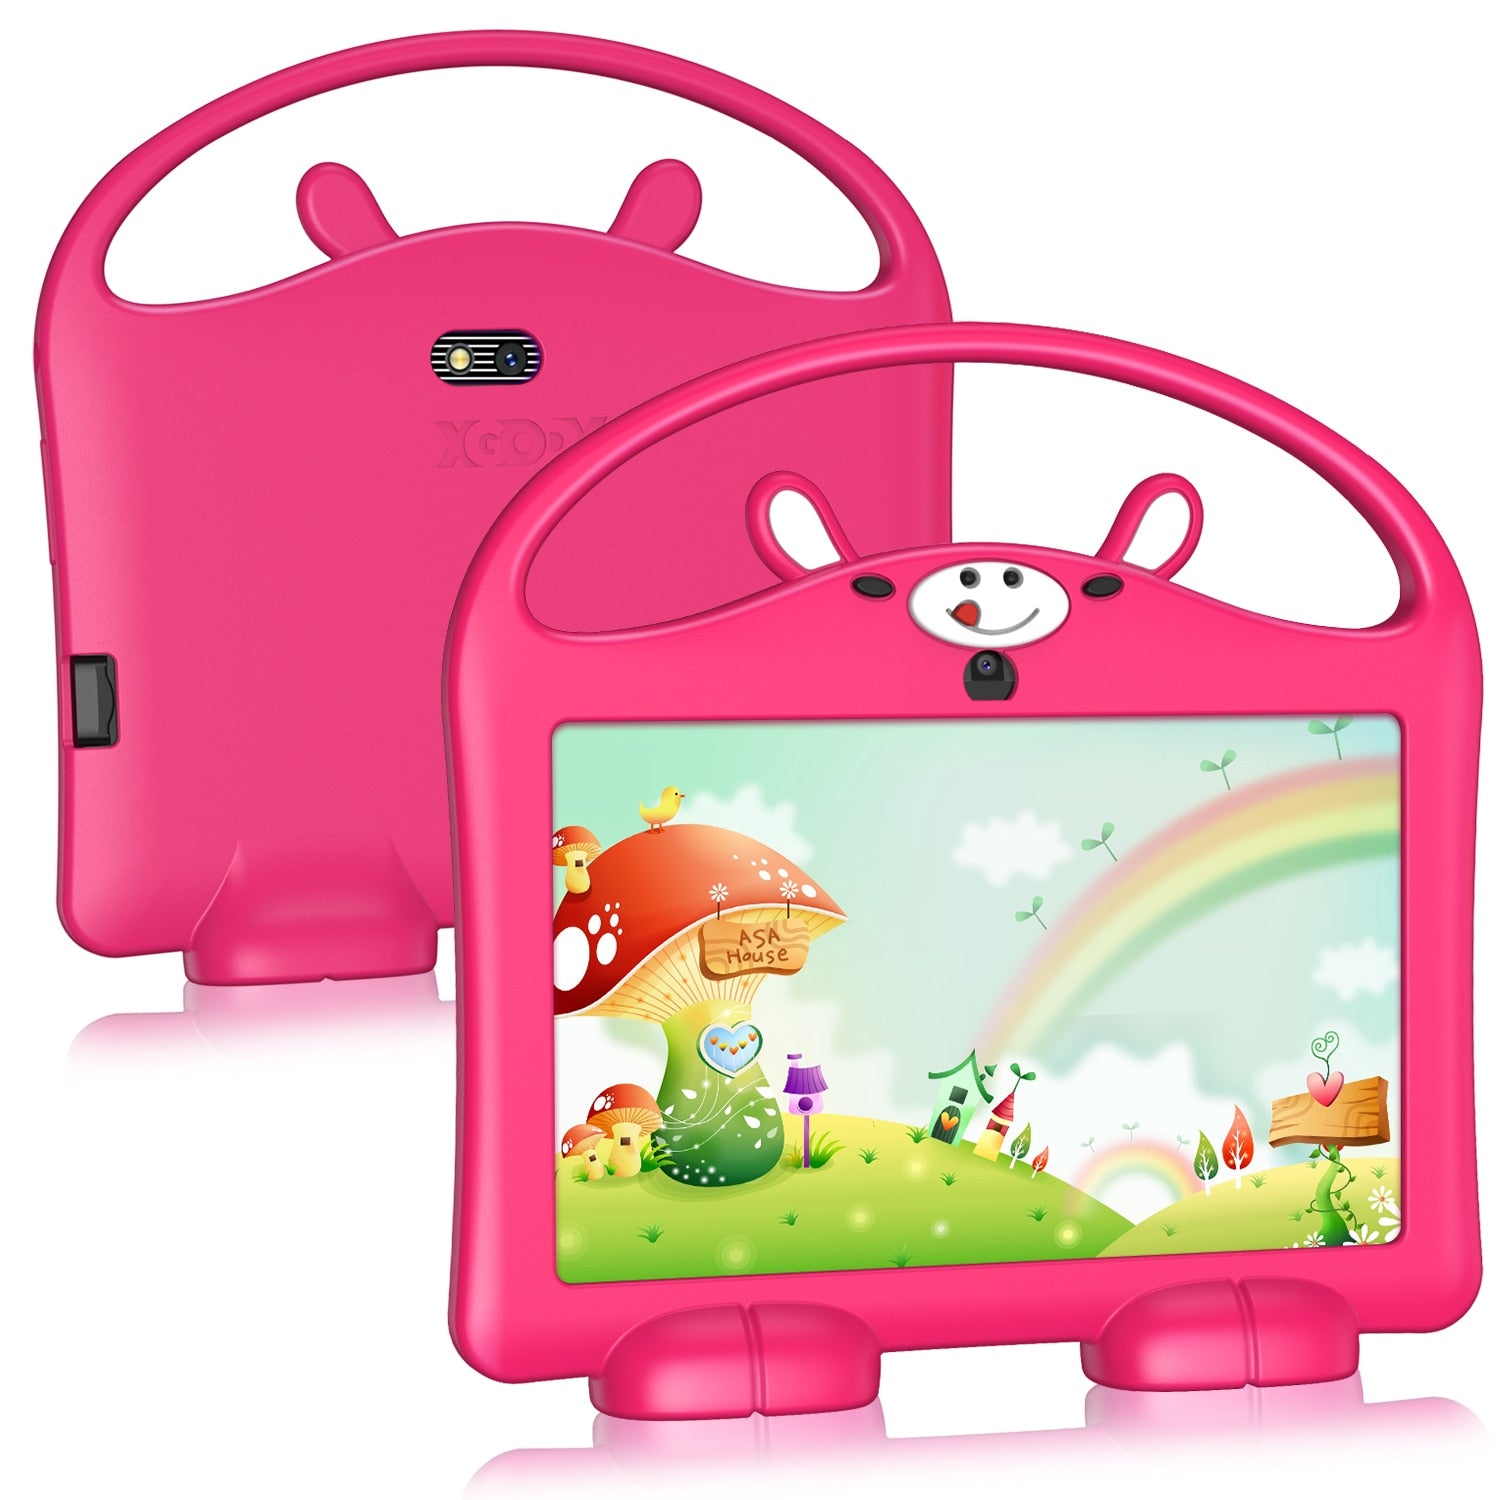 XGODY 7 Inch Android Kids Tablet PC For Study Education 64GB ROM Quad Core WiFi OTG 1024x600 Children Tablets With Tablet Case